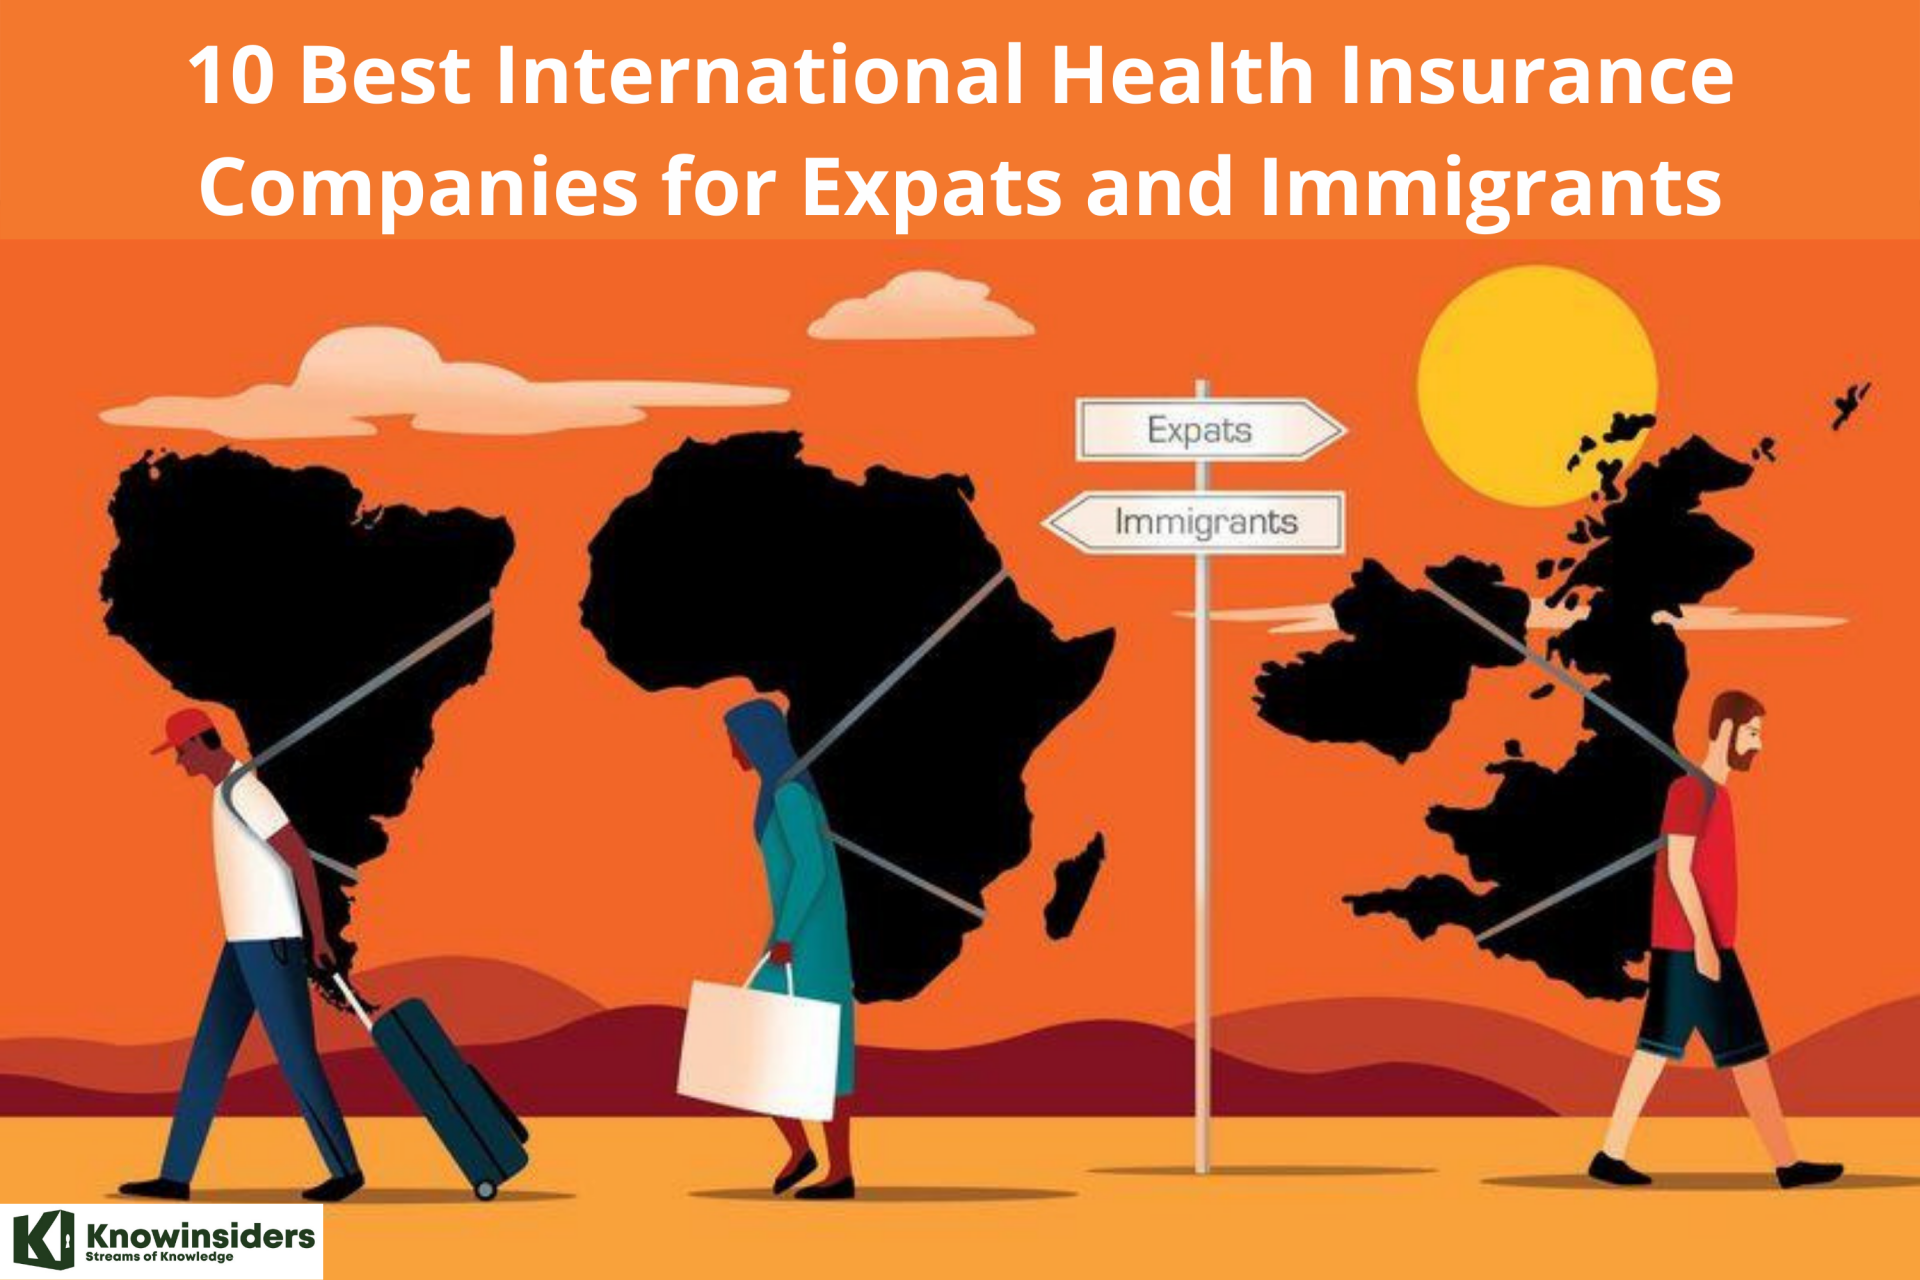 10 Largest International Health Insurance Companies for Expats